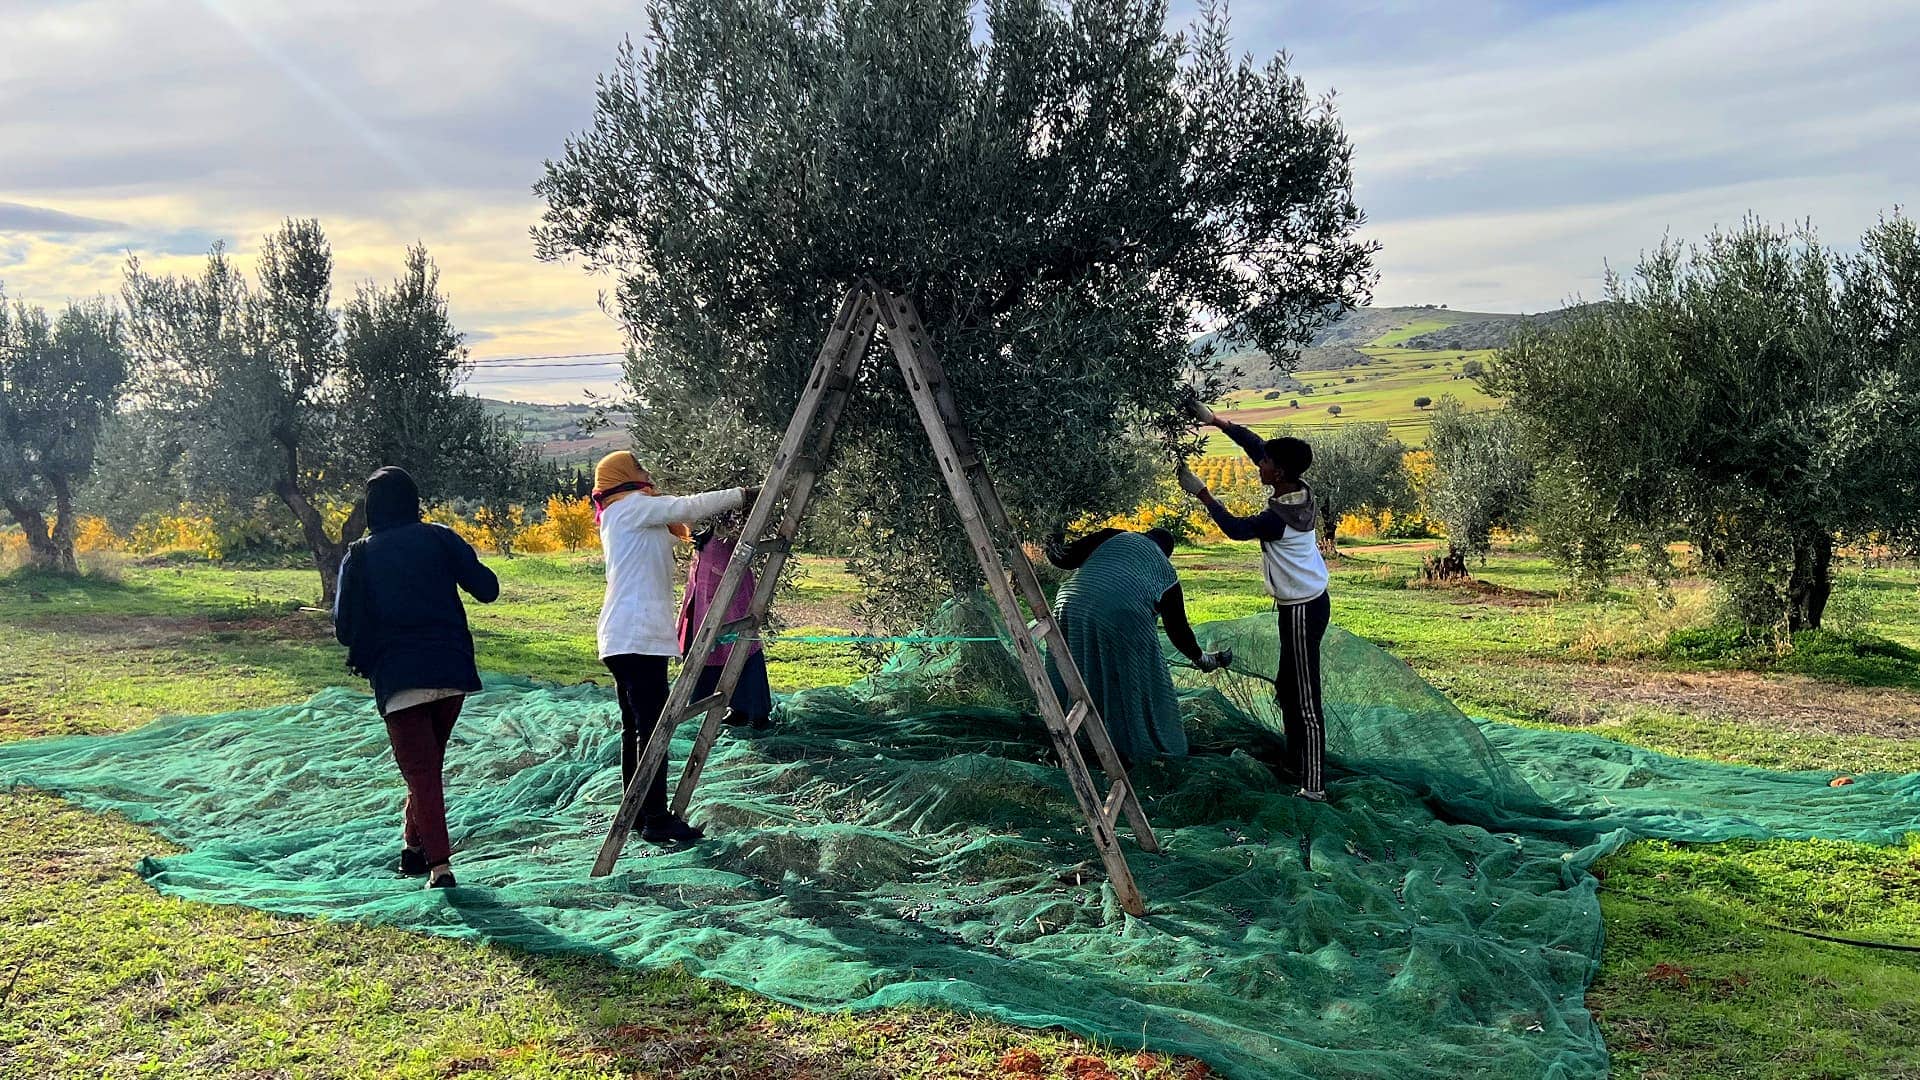 africa-middle-east-the-best-olive-oils-competitions-production-tunisian-producers-celebrate-victory-after-season-plagued-by-drought-olive-oil-times